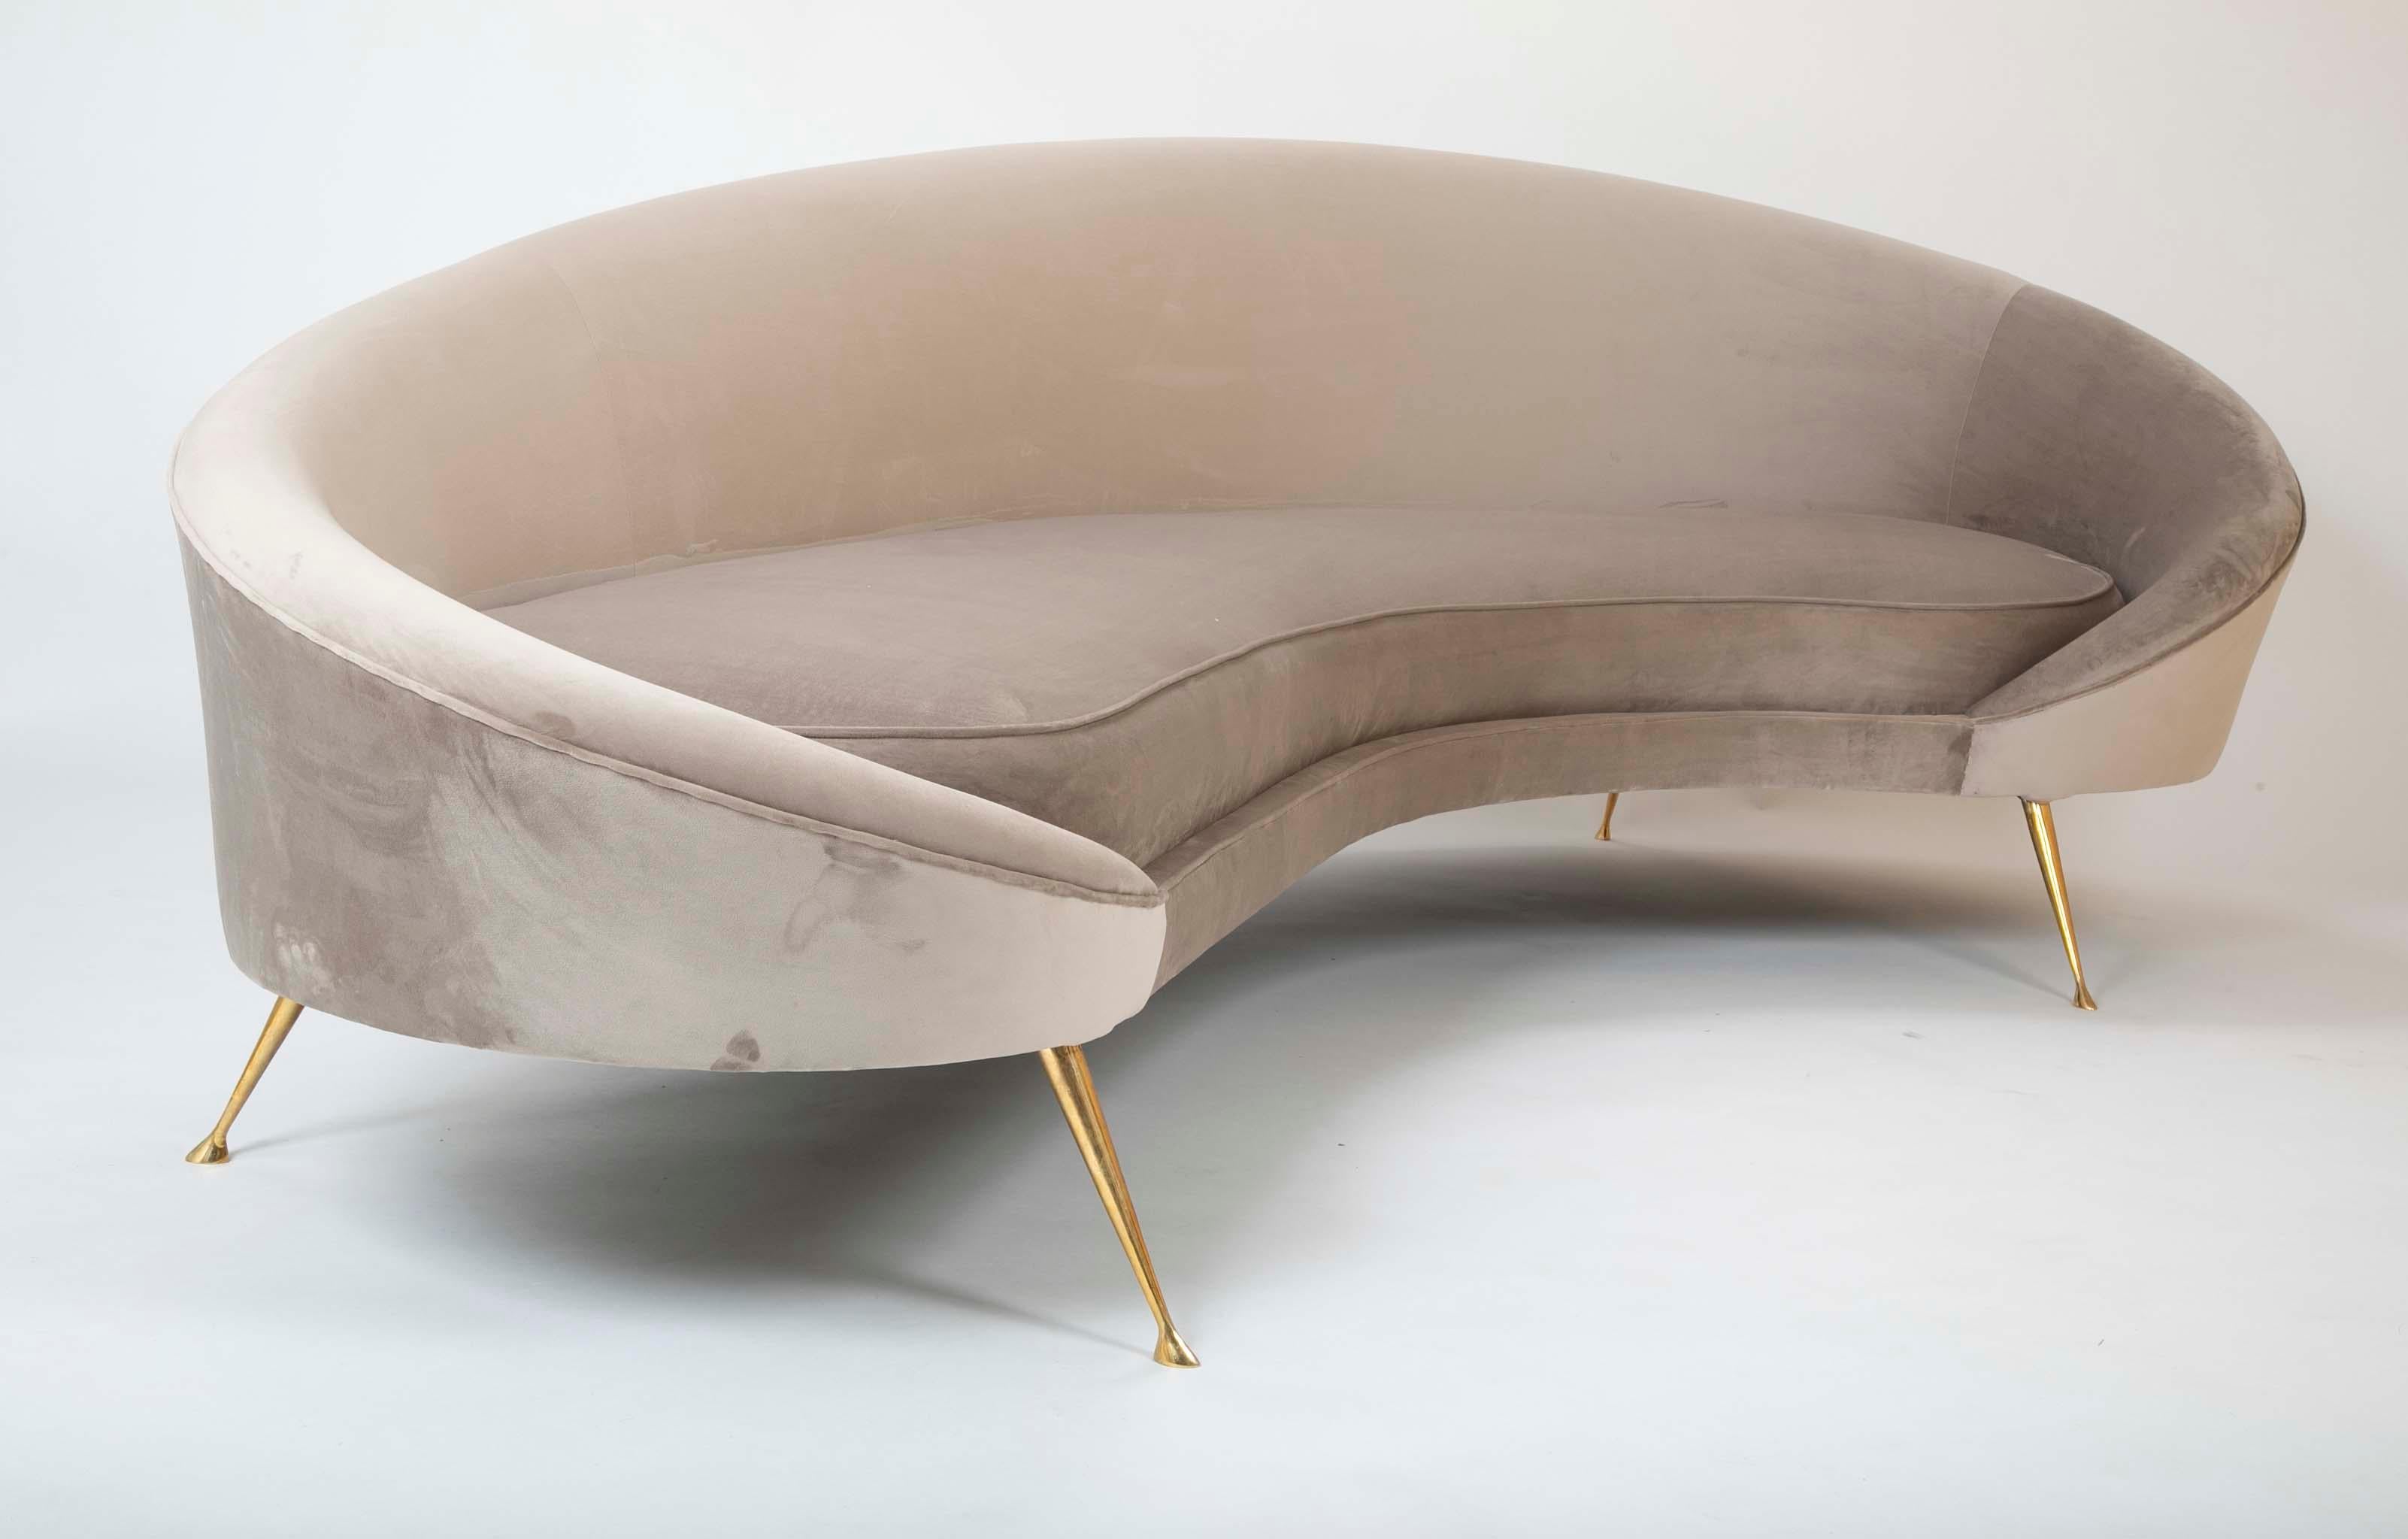 An Italian sofa designed by Federico Munari. Newly upholstered in pewter colored Velvet.